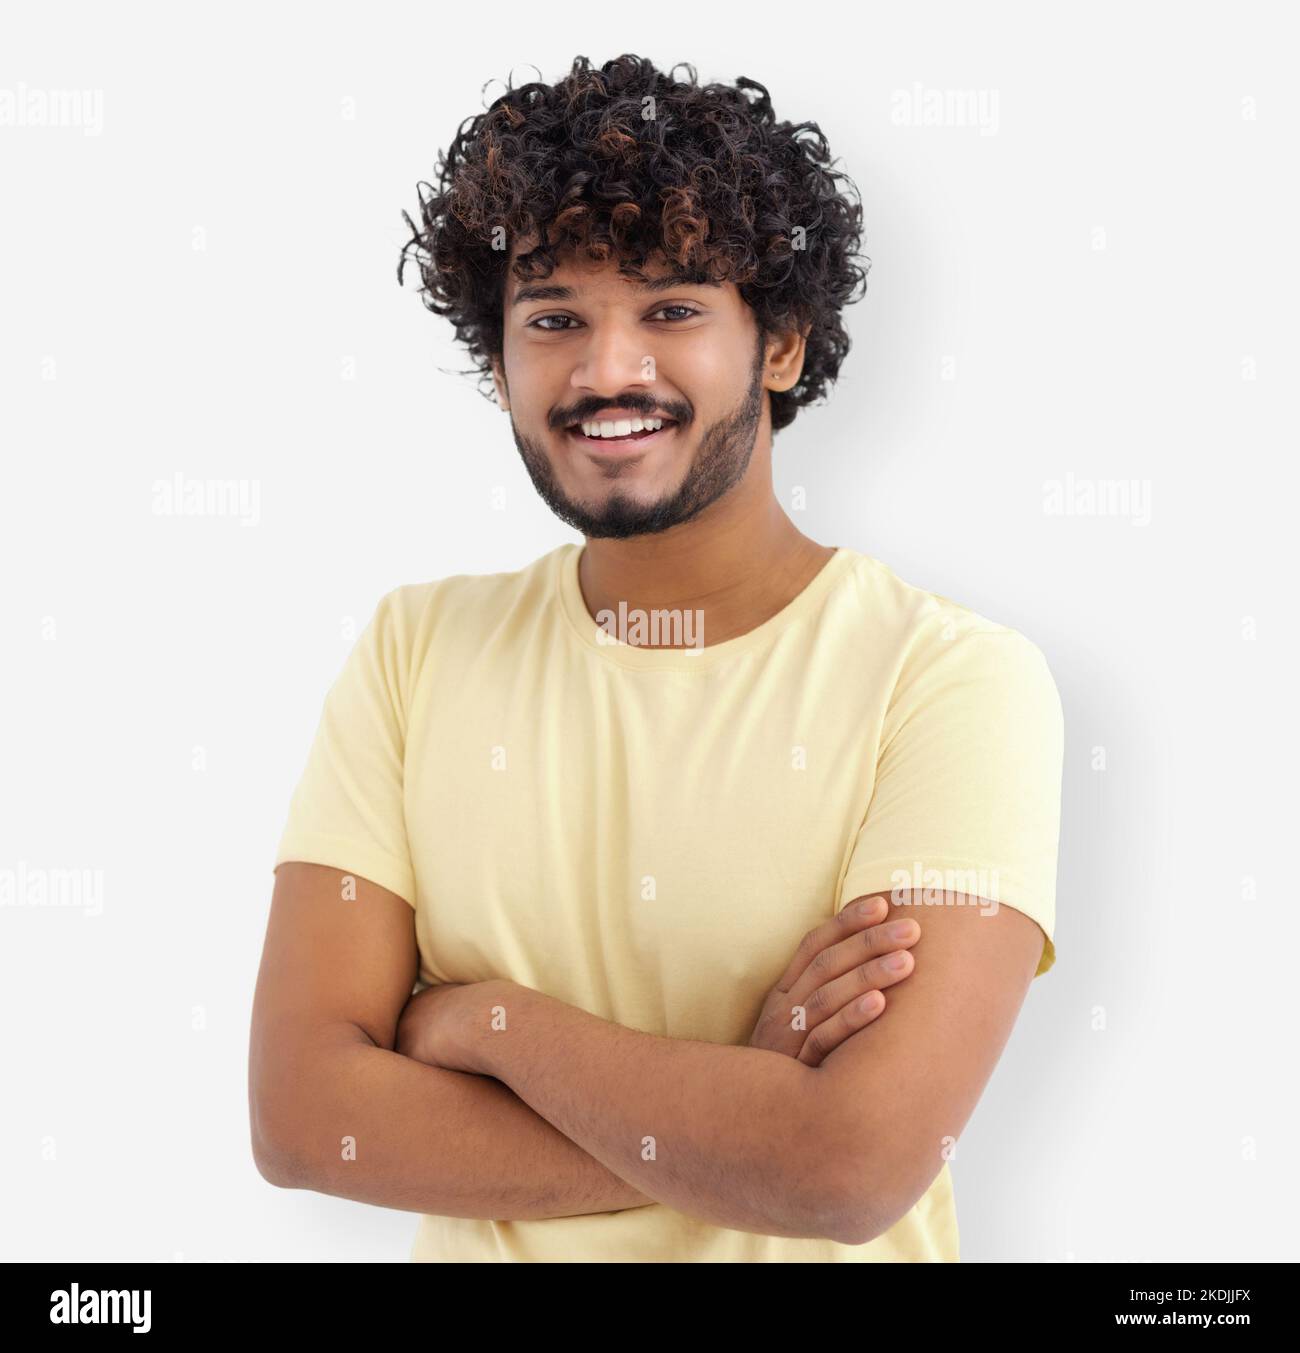 Portrait of happy Asian man guy with curly hair and white teeth in a yellow t-shirt standing on white background Stock Photo